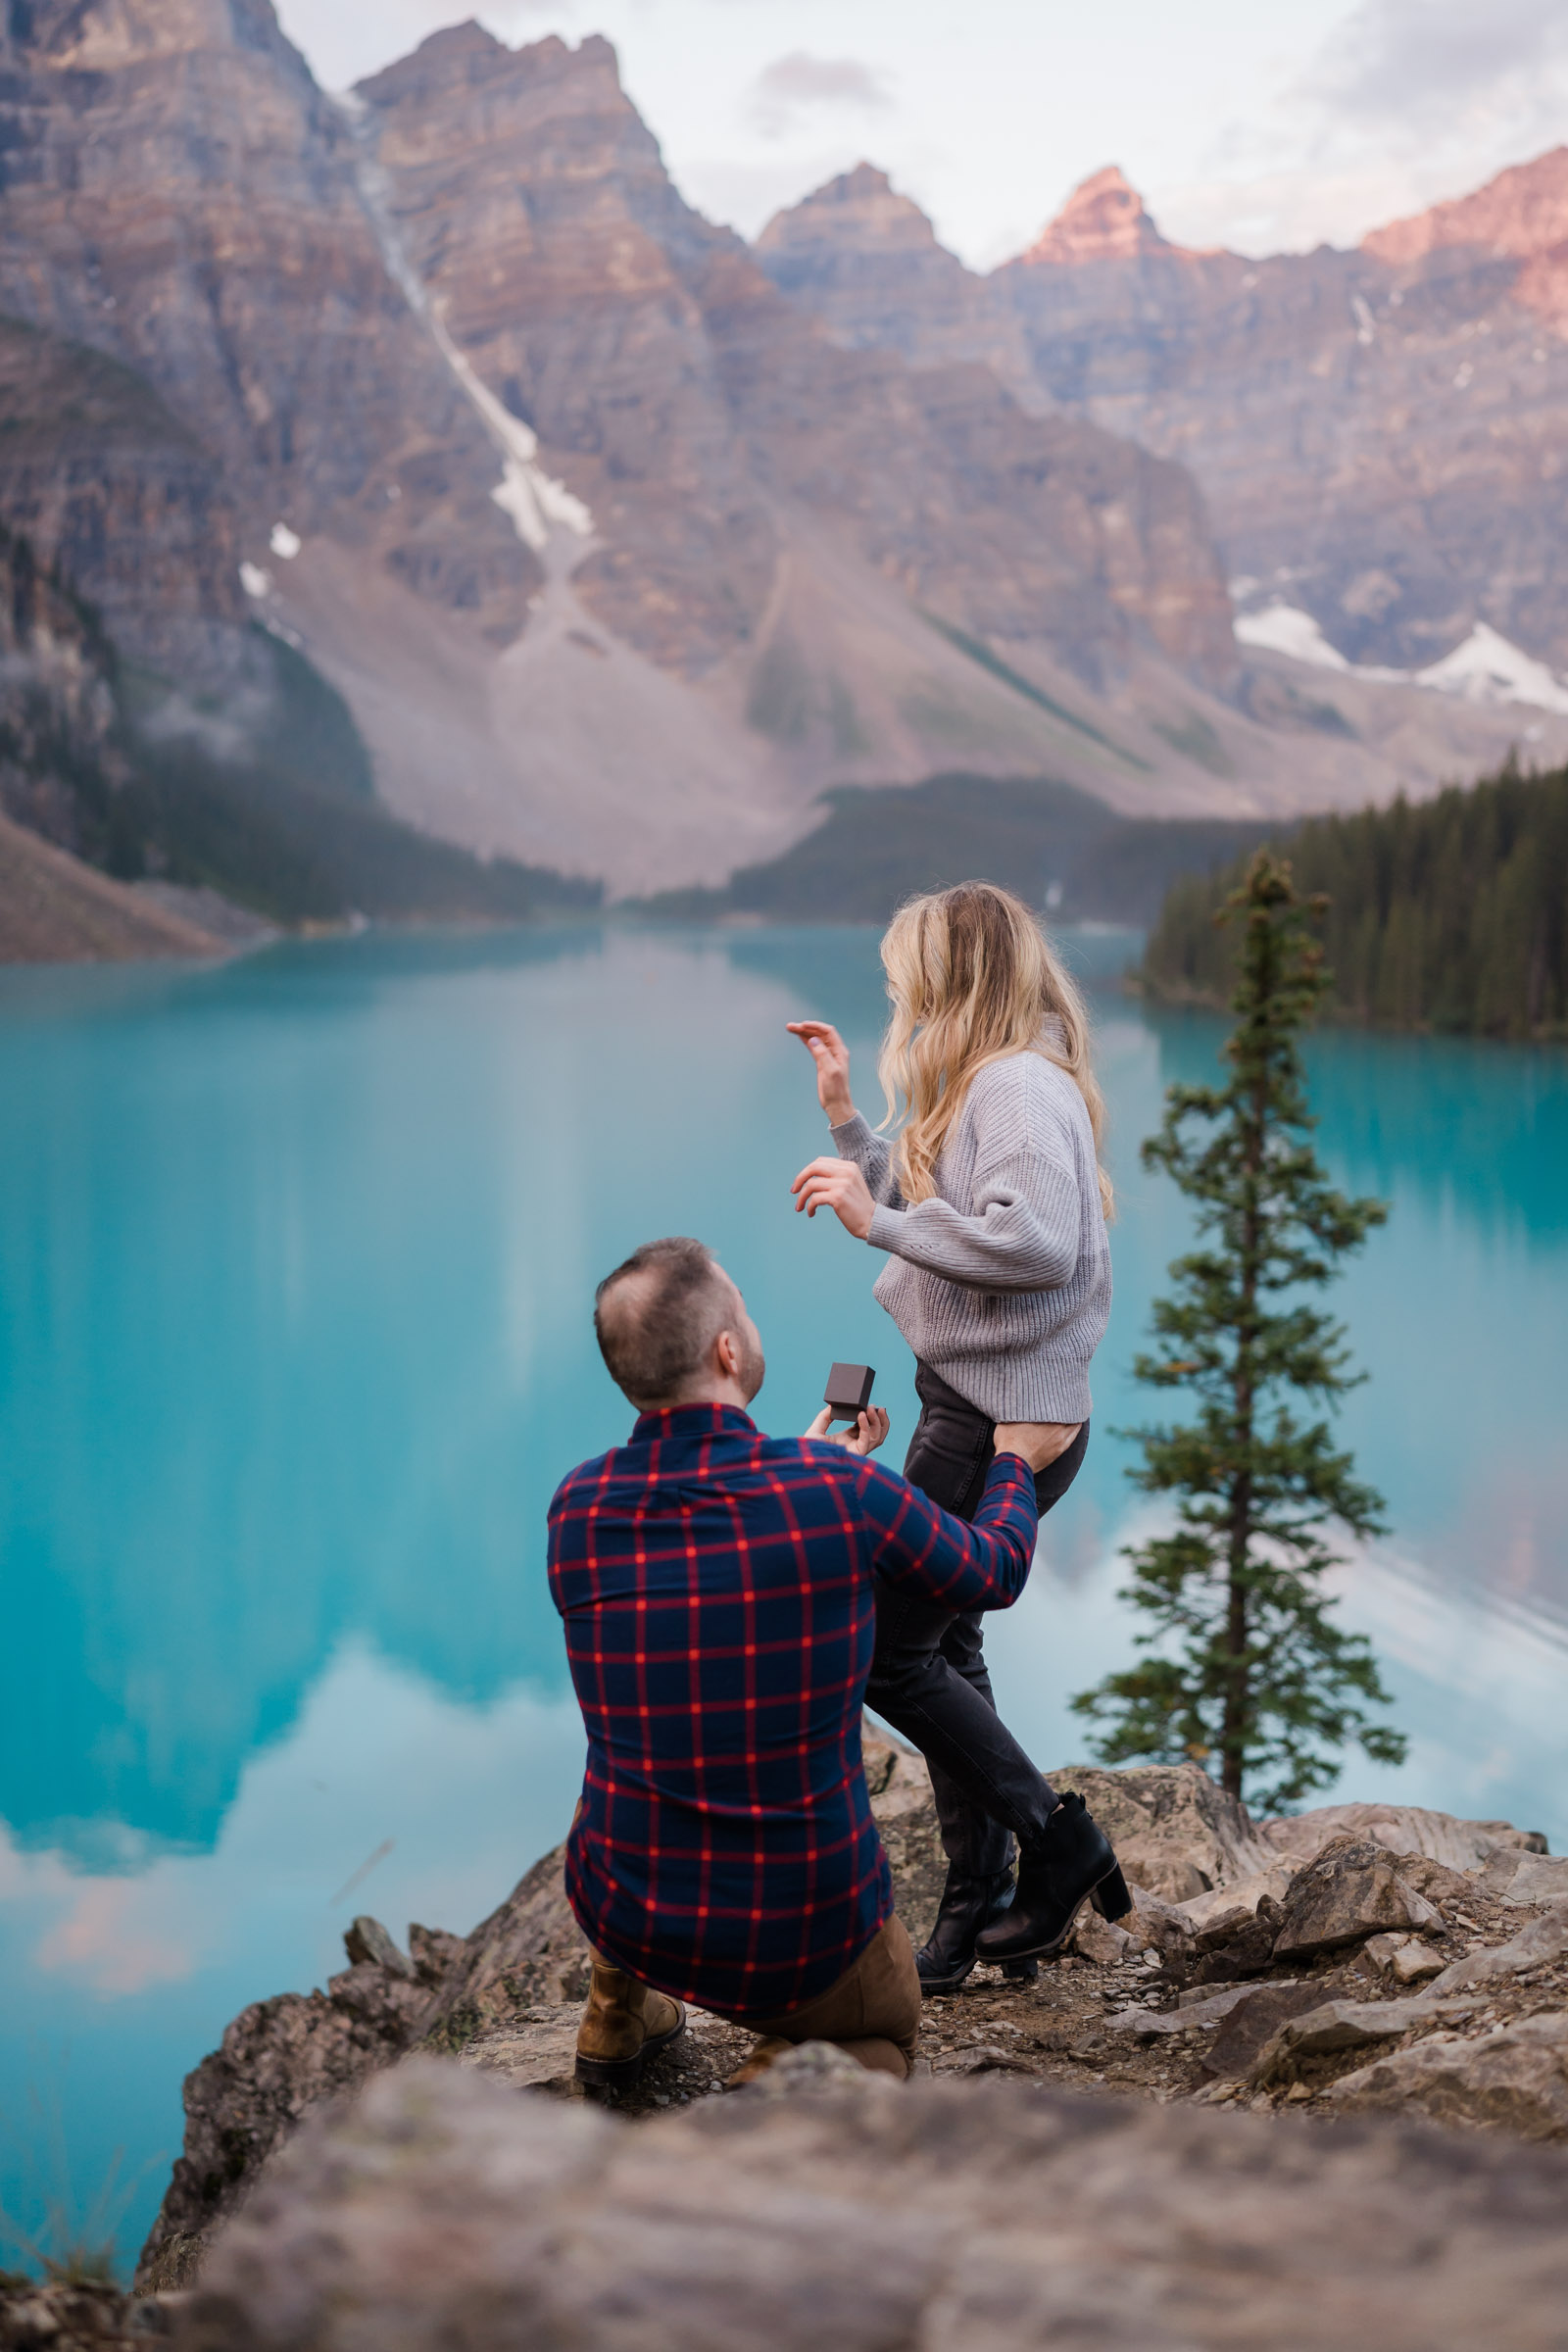 Man in plaid shirt is kneeling infront of his girlfriend showing her the ring as he is proposing and she is turning away in surprise